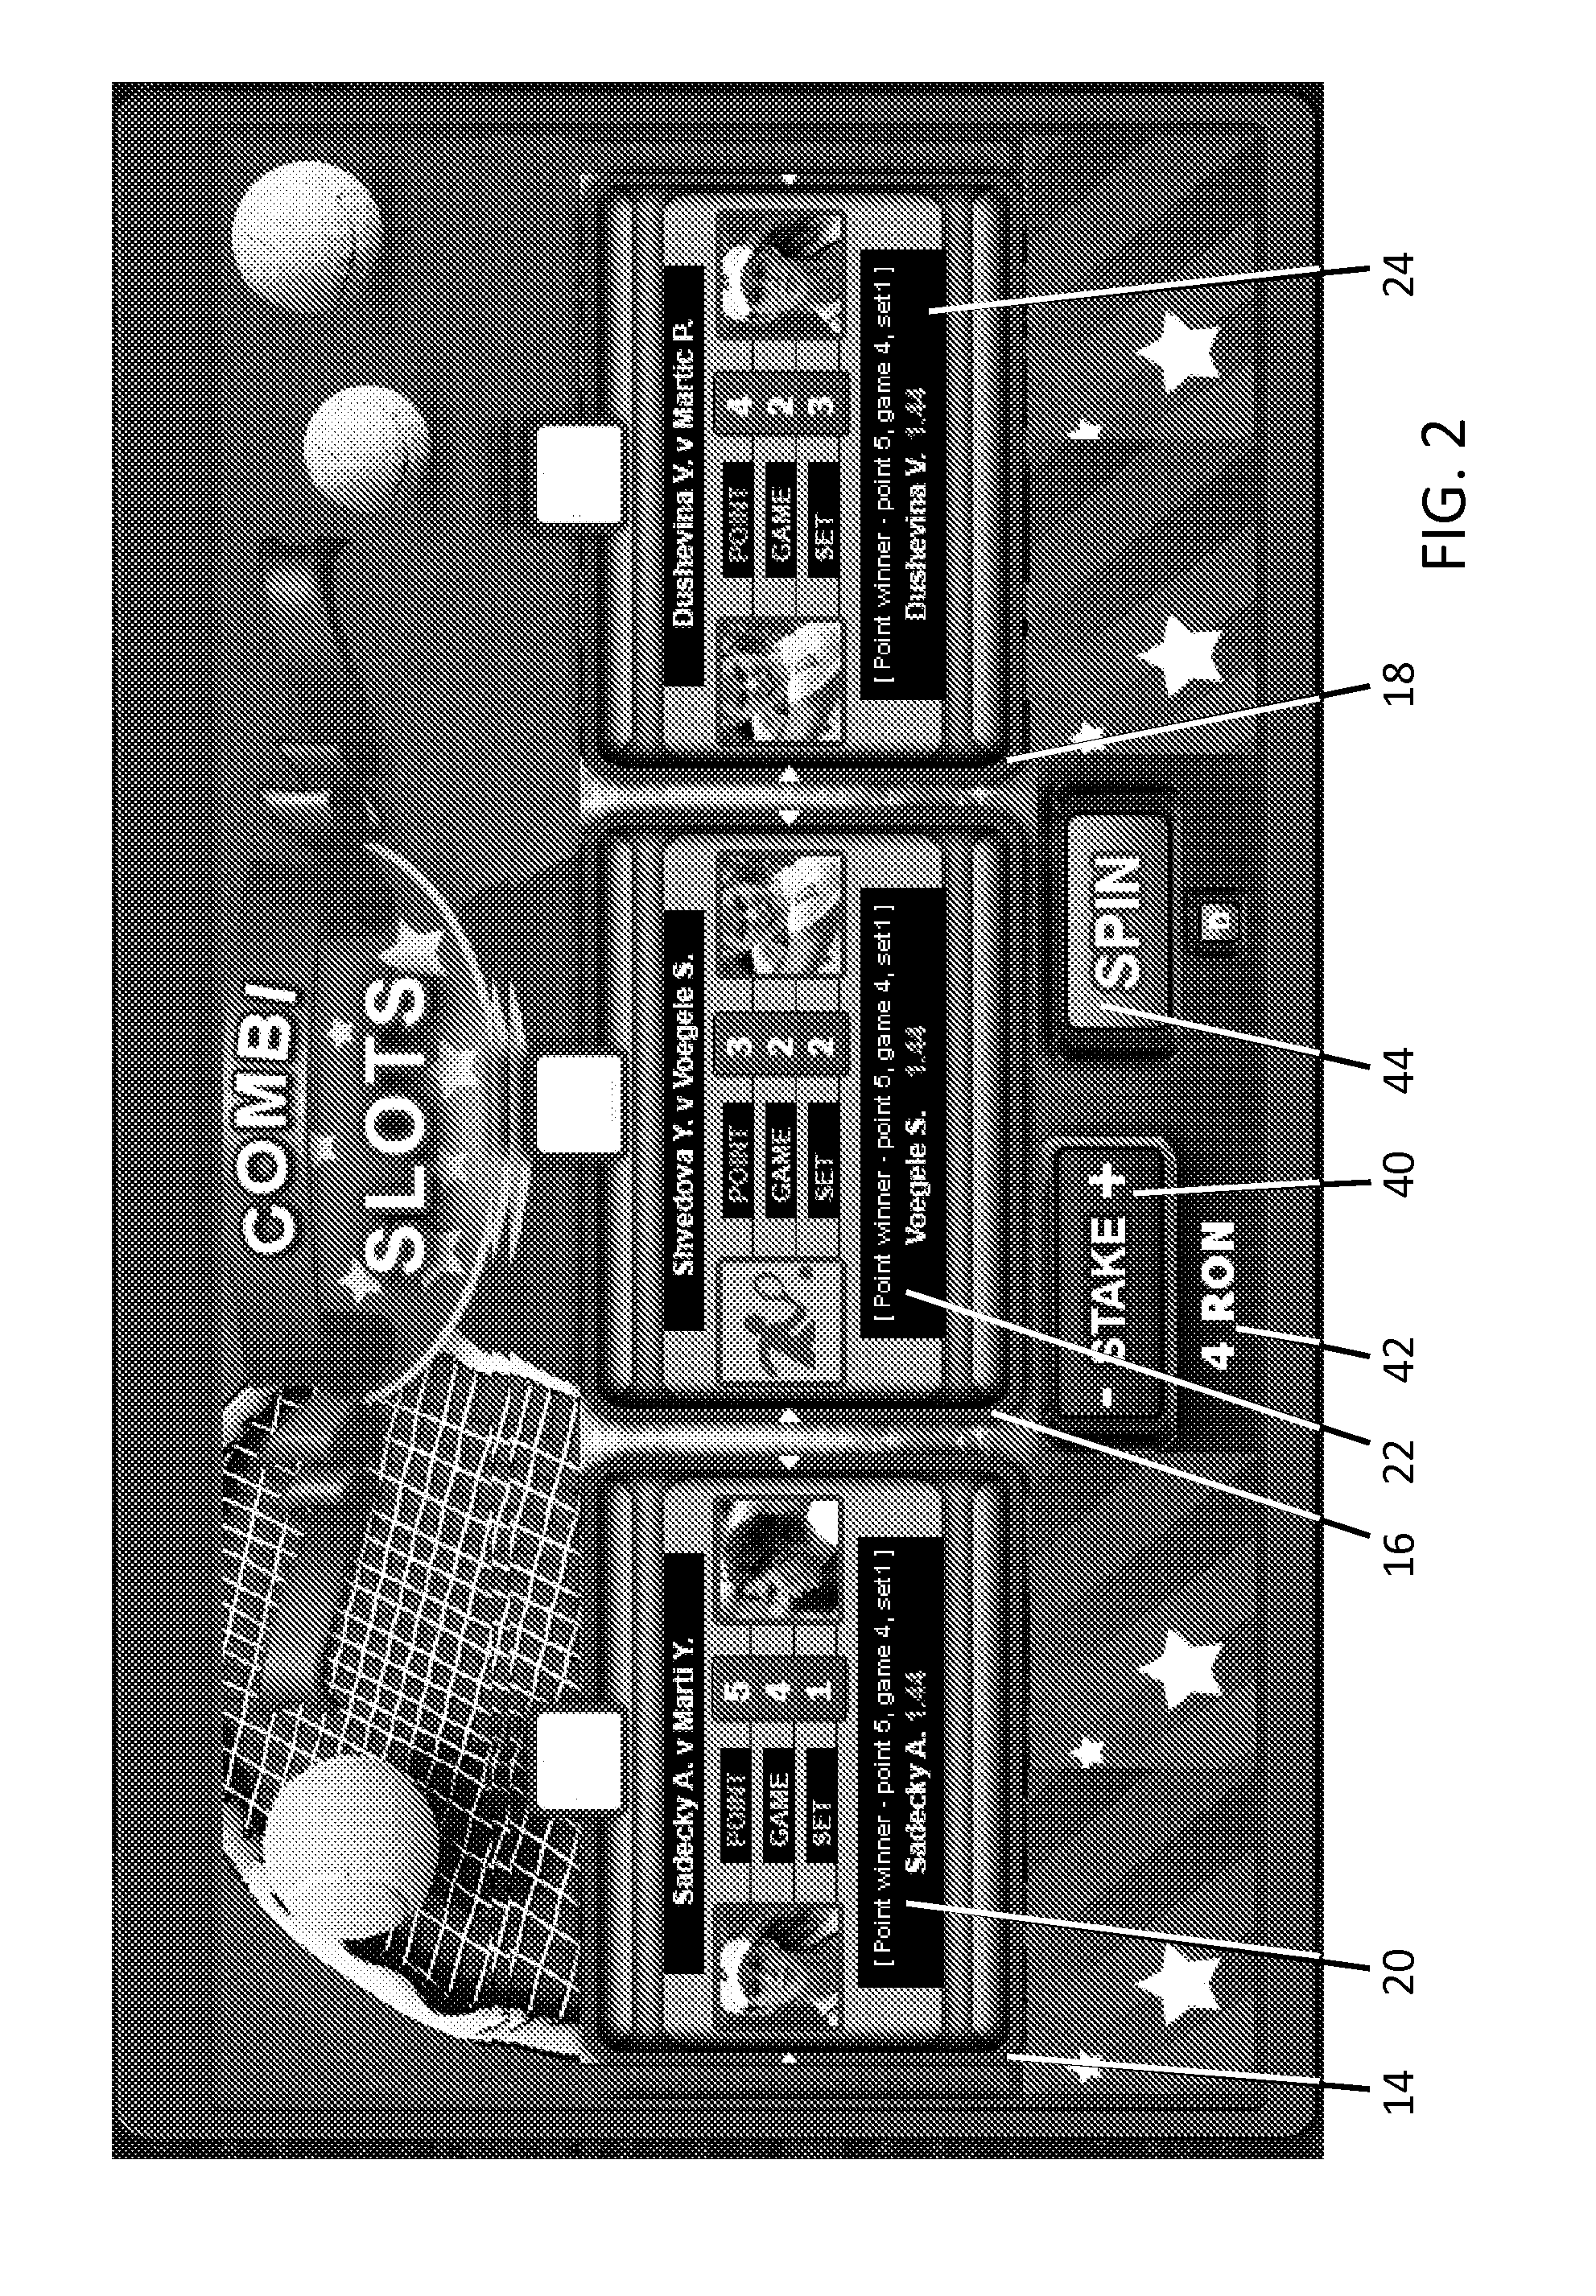 System and Method for Generating and Placing Combination Bets